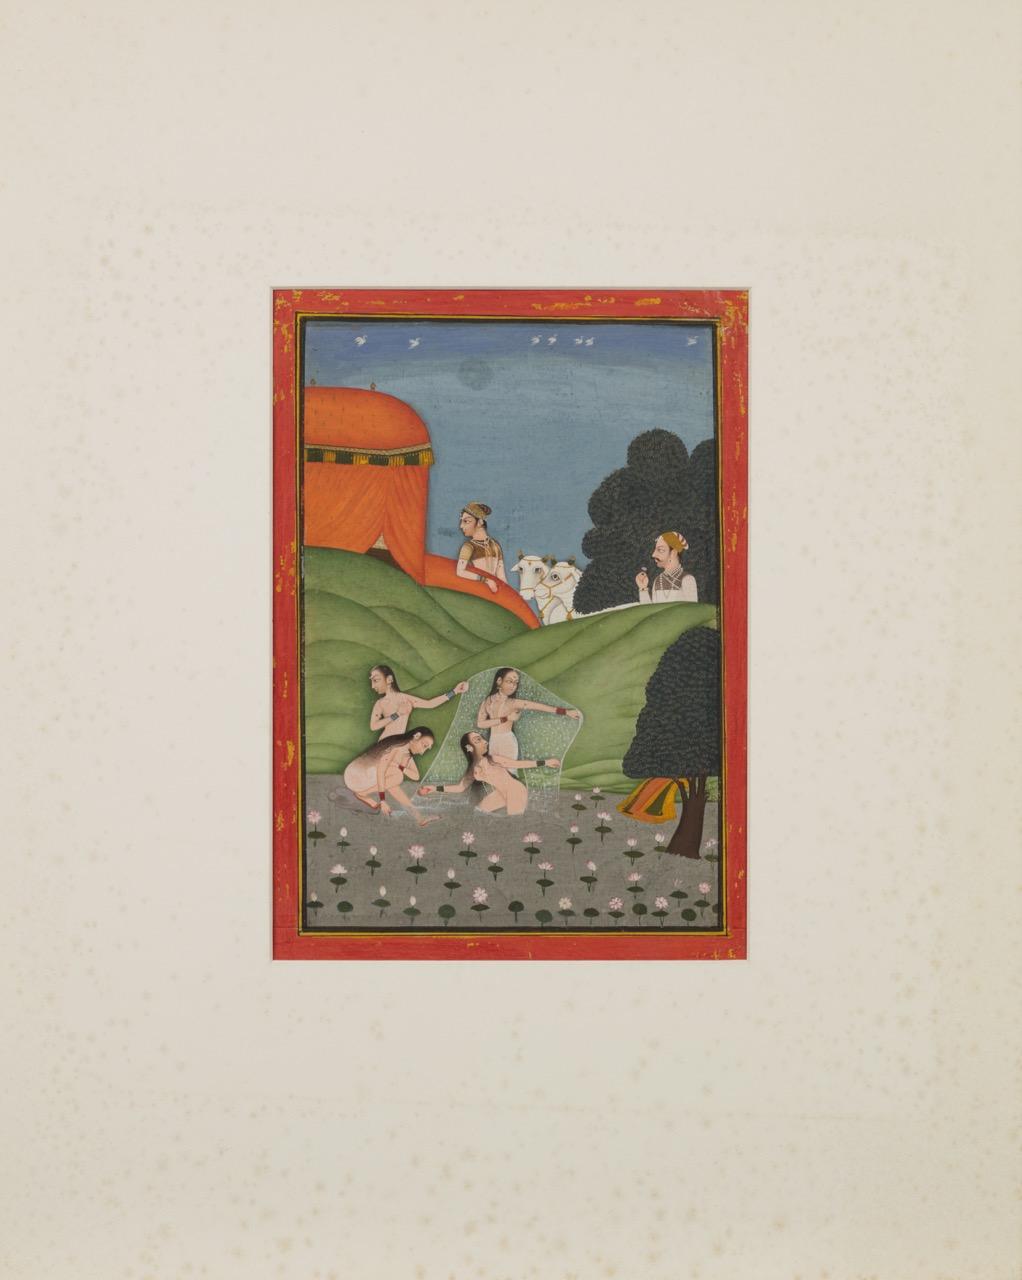 Painted An Indian miniature painting depicting a prince surprising bathing maidens For Sale